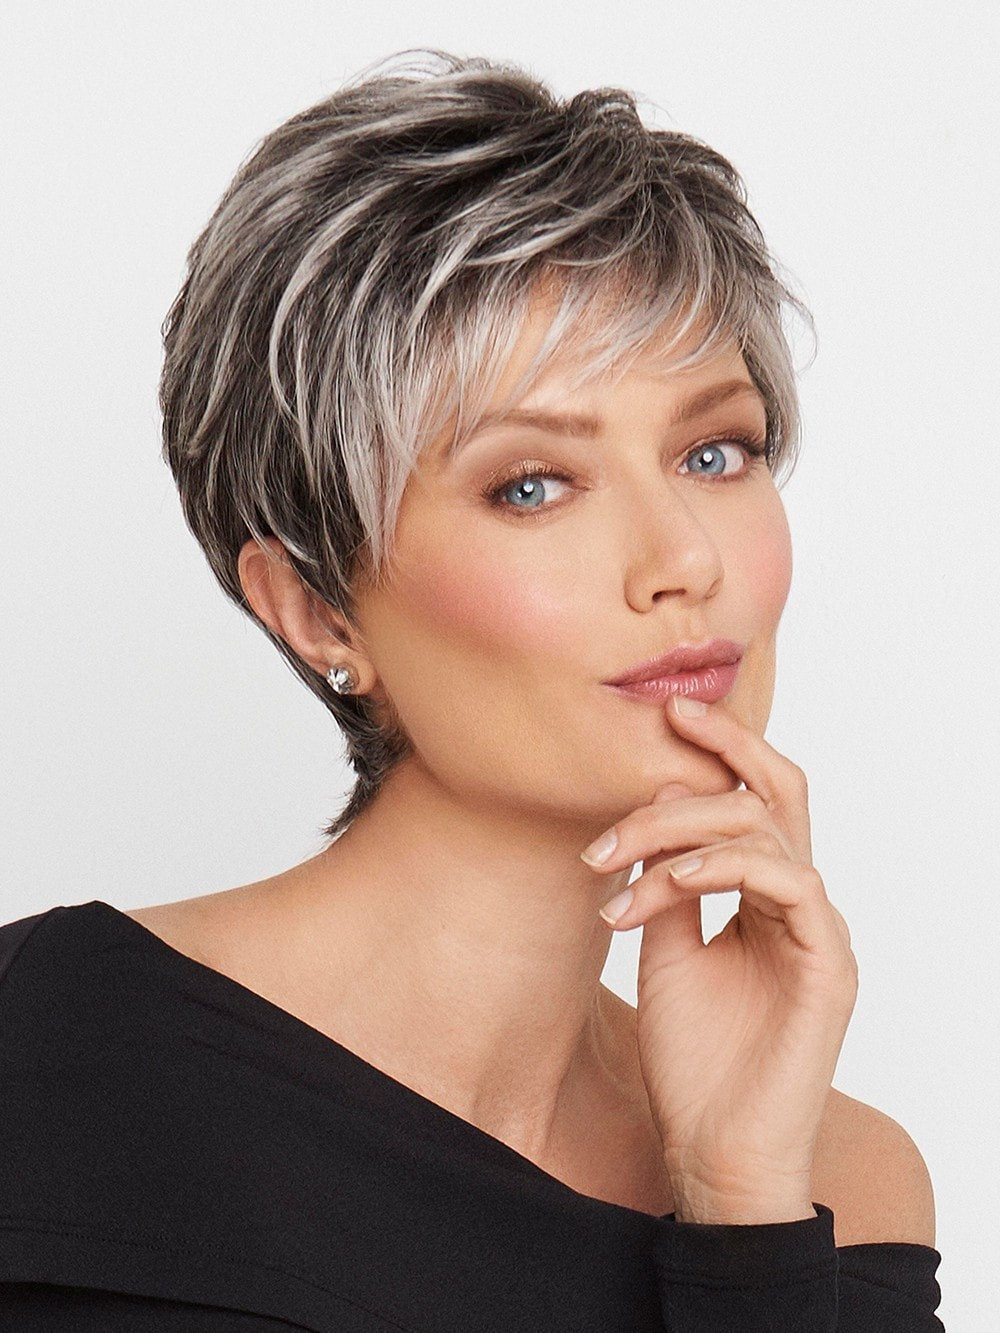 Hairstyles Short Women
 30 Superb Short Hairstyles For Women Over 40